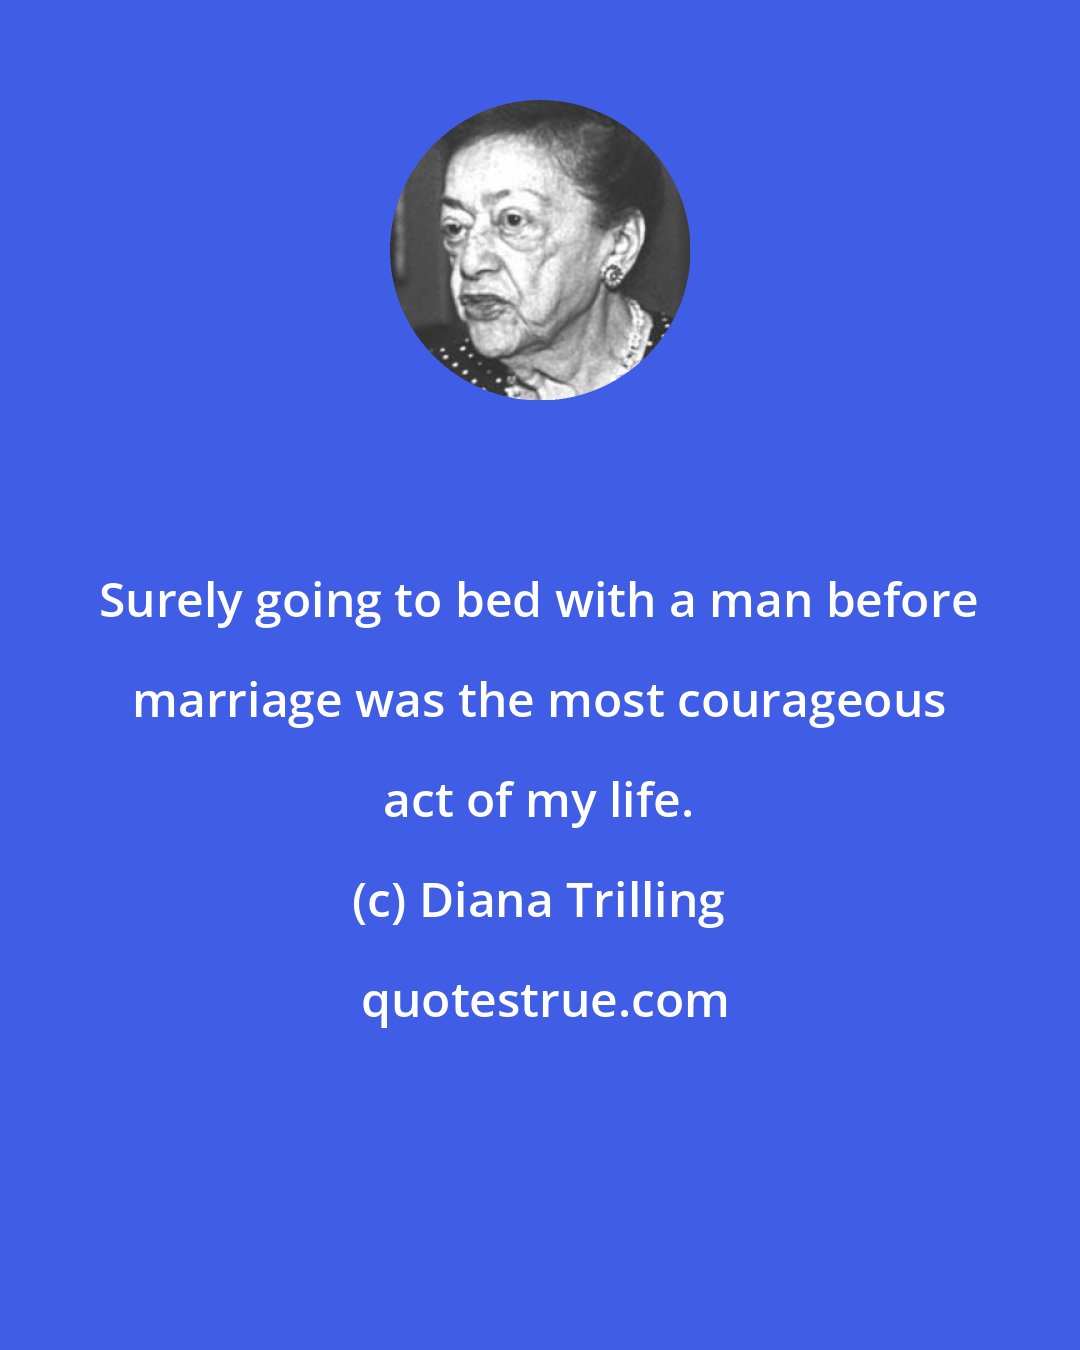 Diana Trilling: Surely going to bed with a man before marriage was the most courageous act of my life.